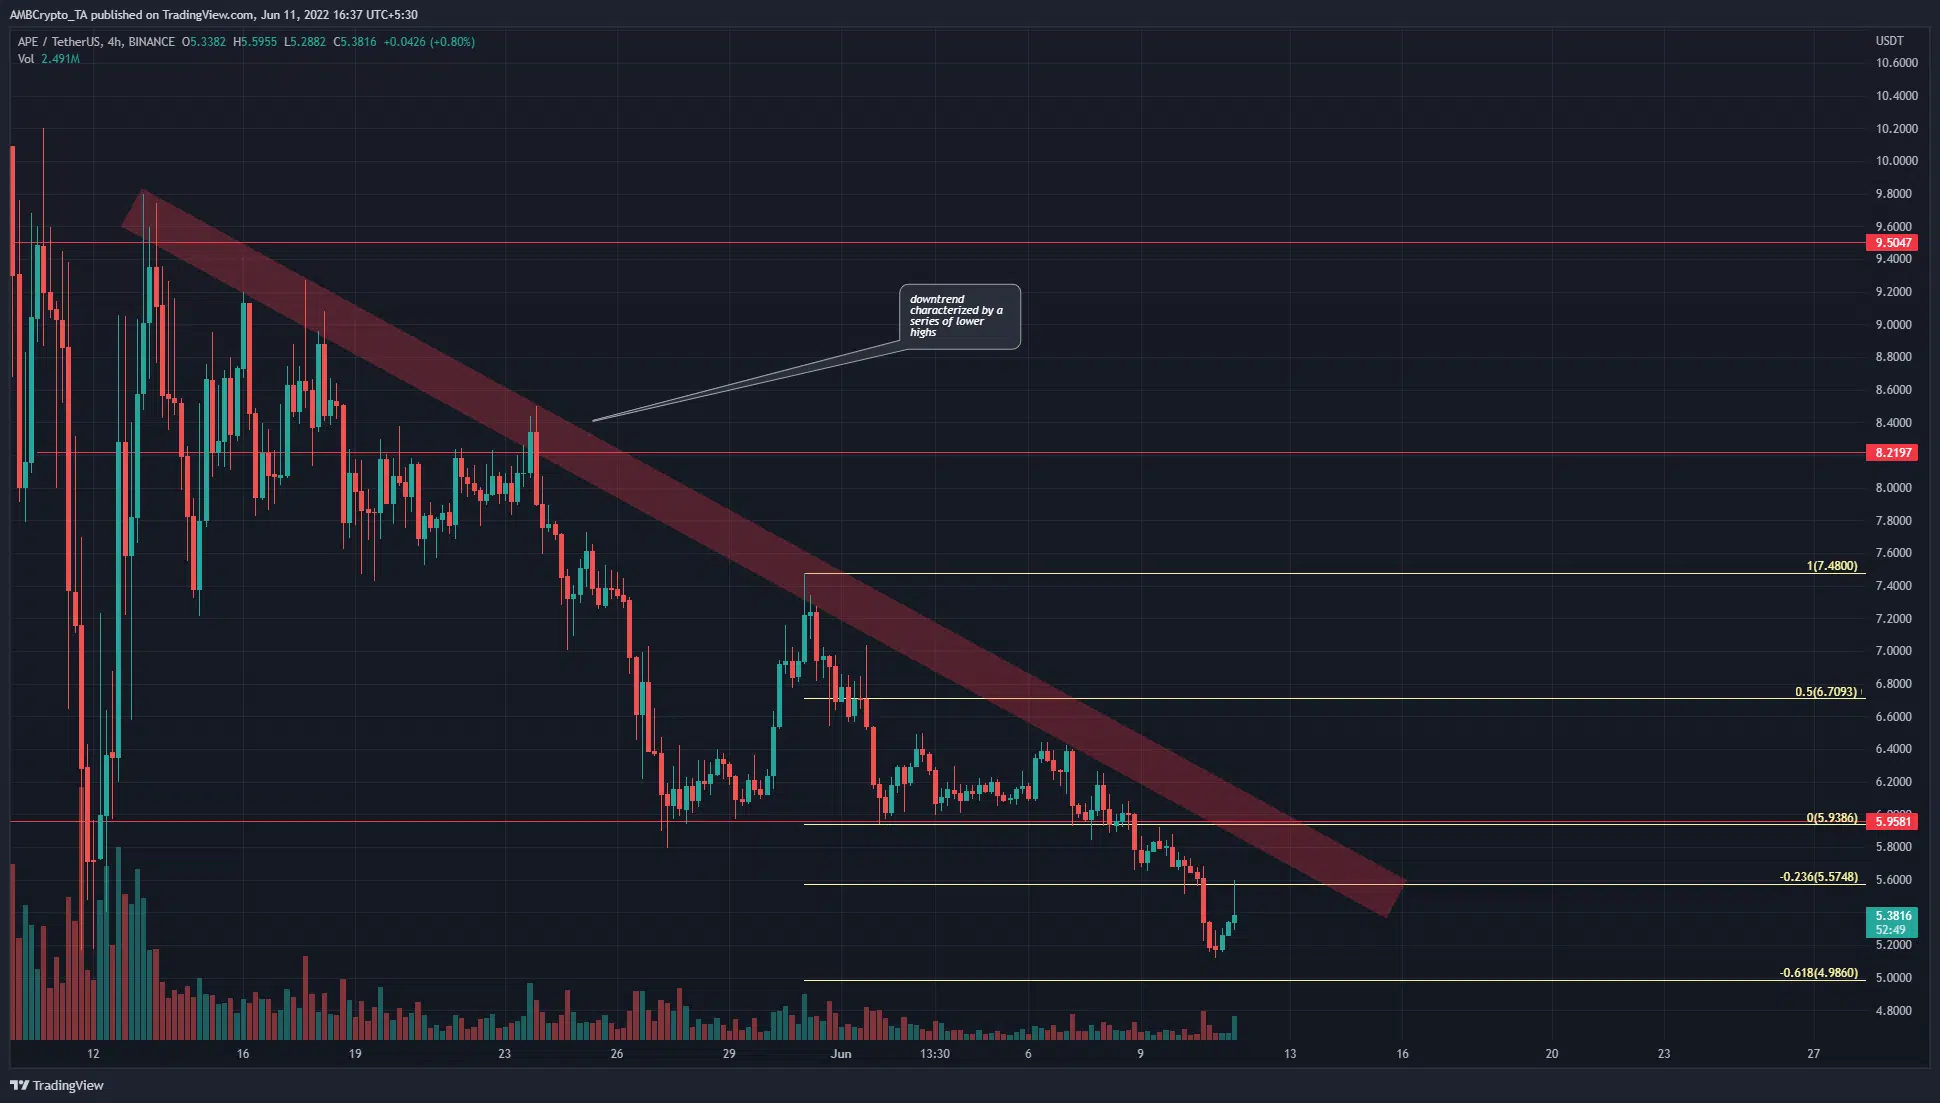 ApeCoin faces stiff resistance in the $5.6 zone, a shorting opportunity could present itself